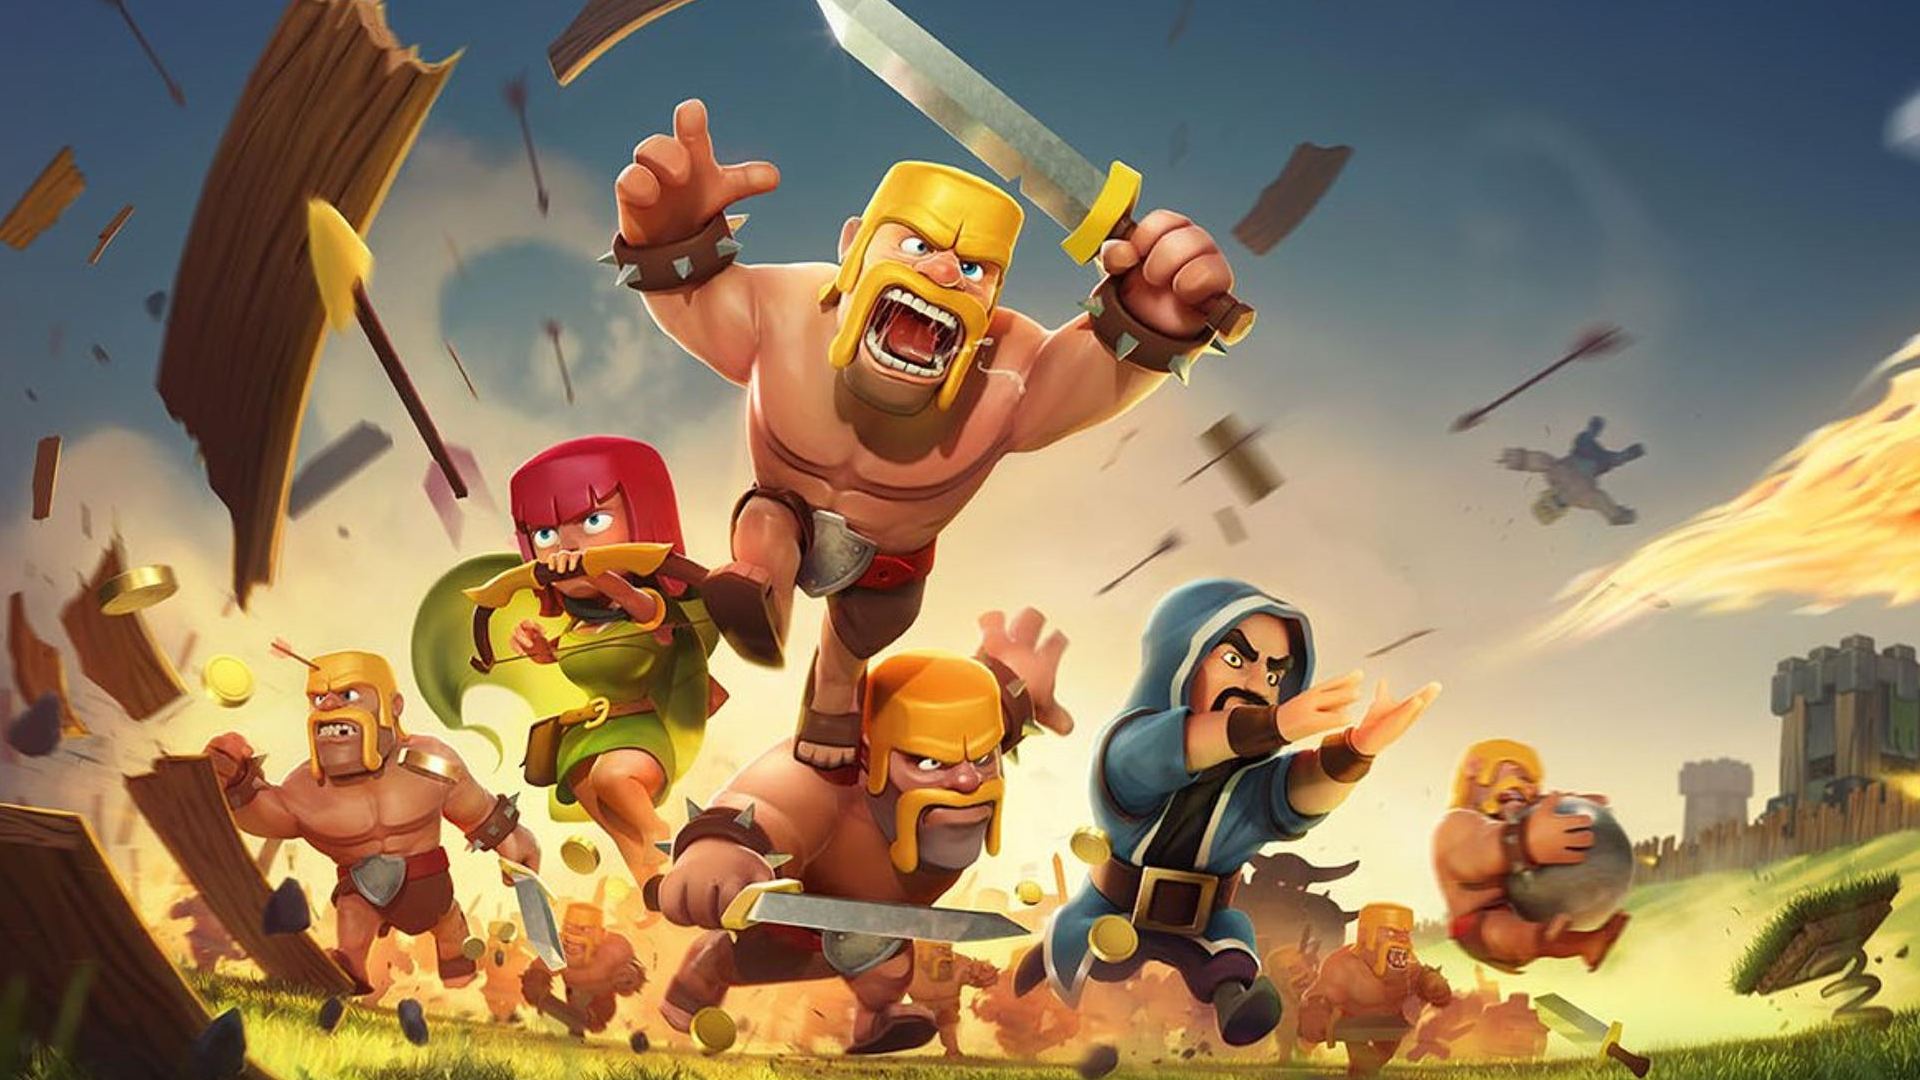 Clash of Clans: Multiple fighters can be seen